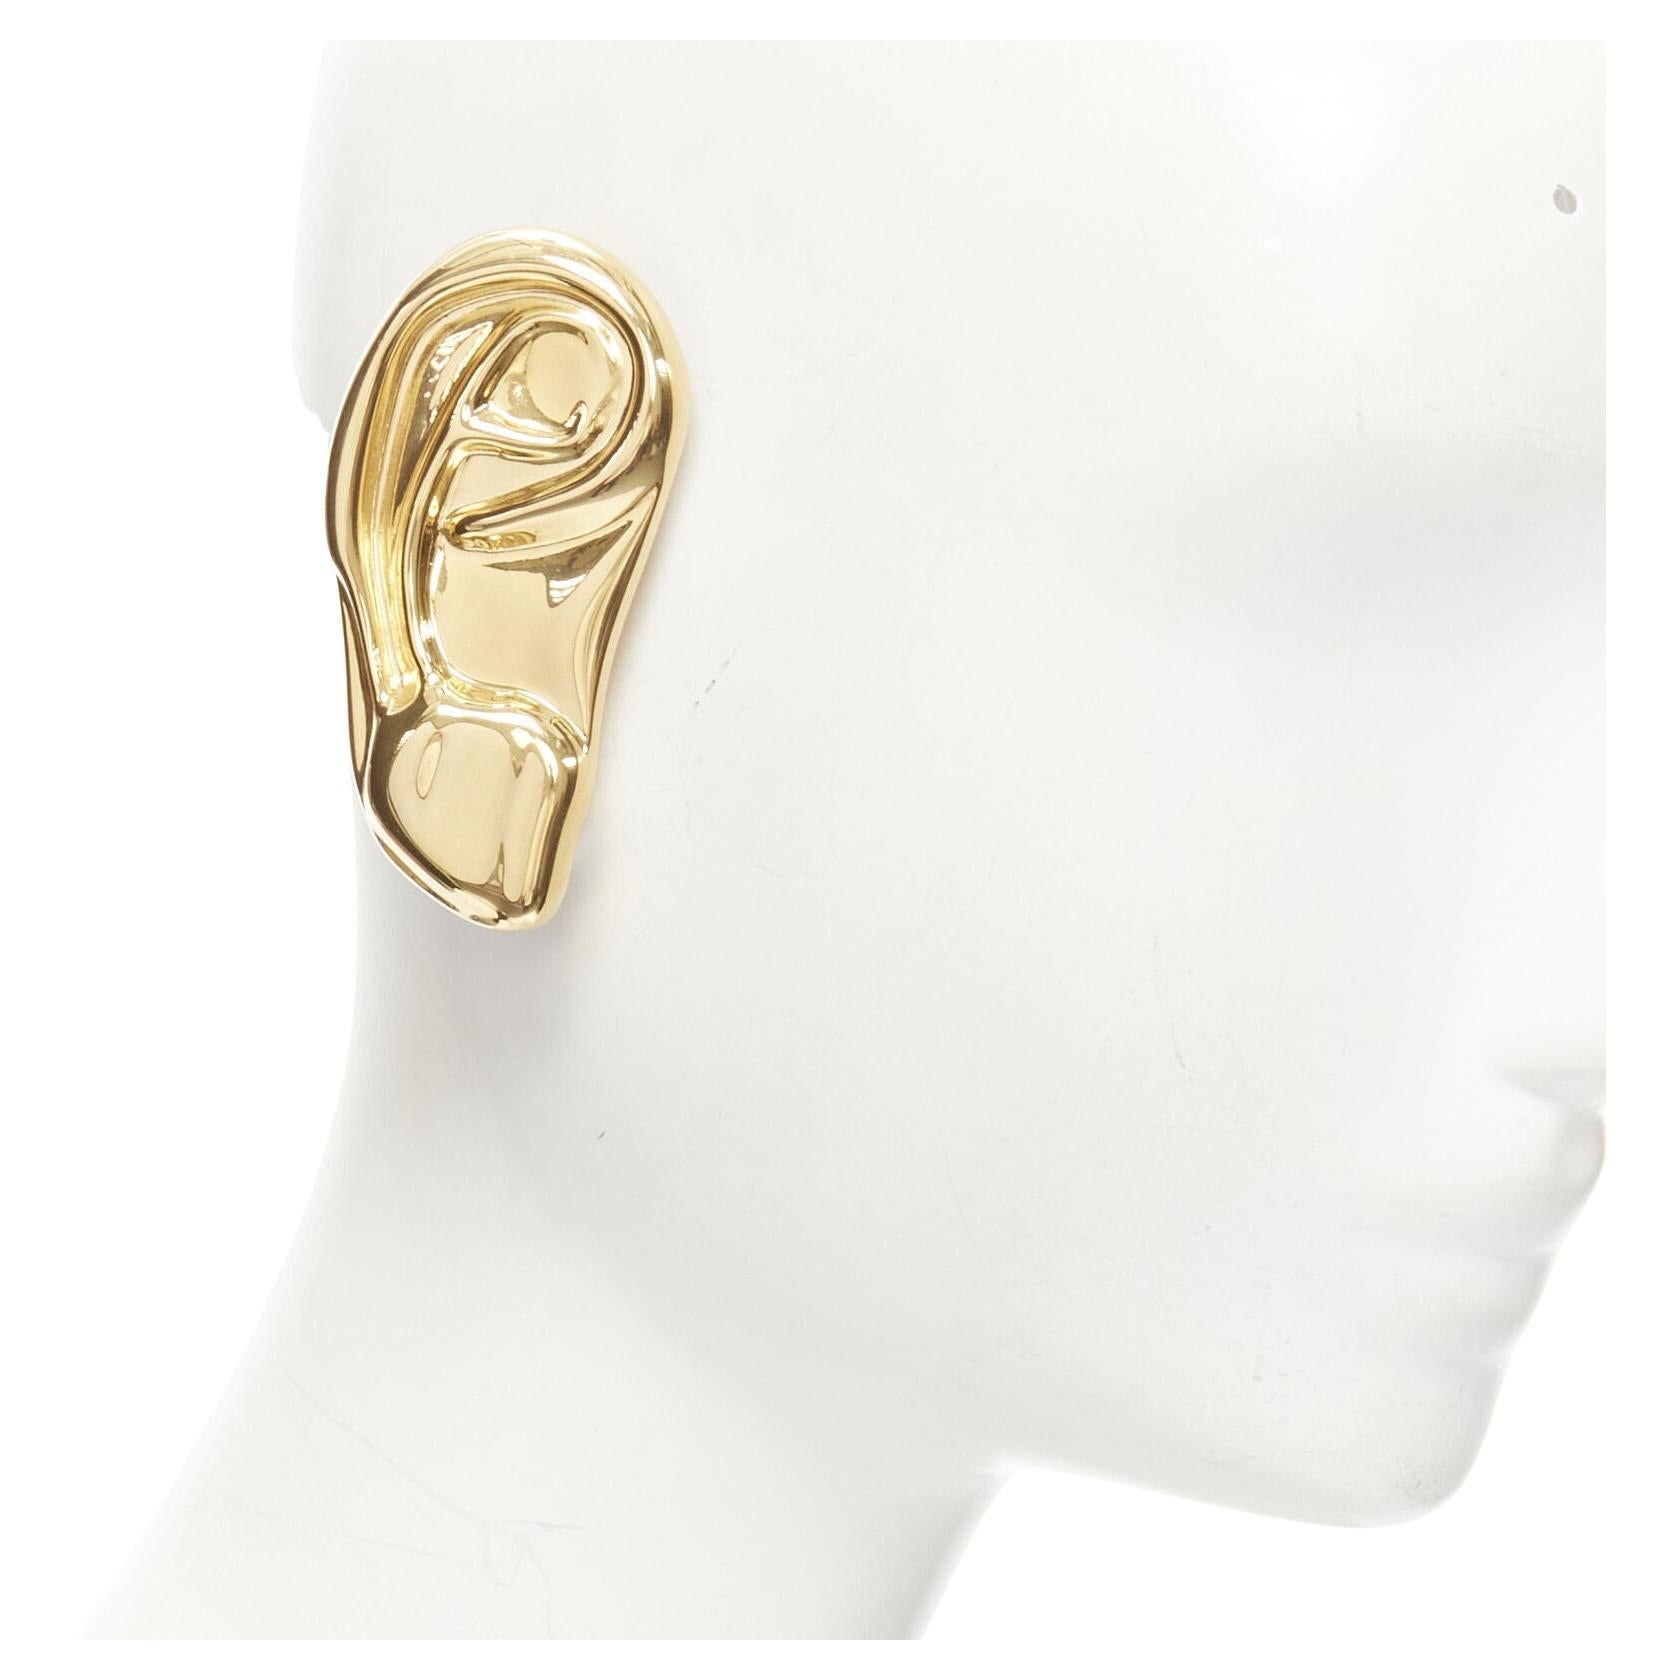 rare GUCCI ALESSANDRO MICHELE Runway Surrealist gold ear clip on earring  single For Sale at 1stDibs | gucci ear cuff, gucci ears, gucci ear clip